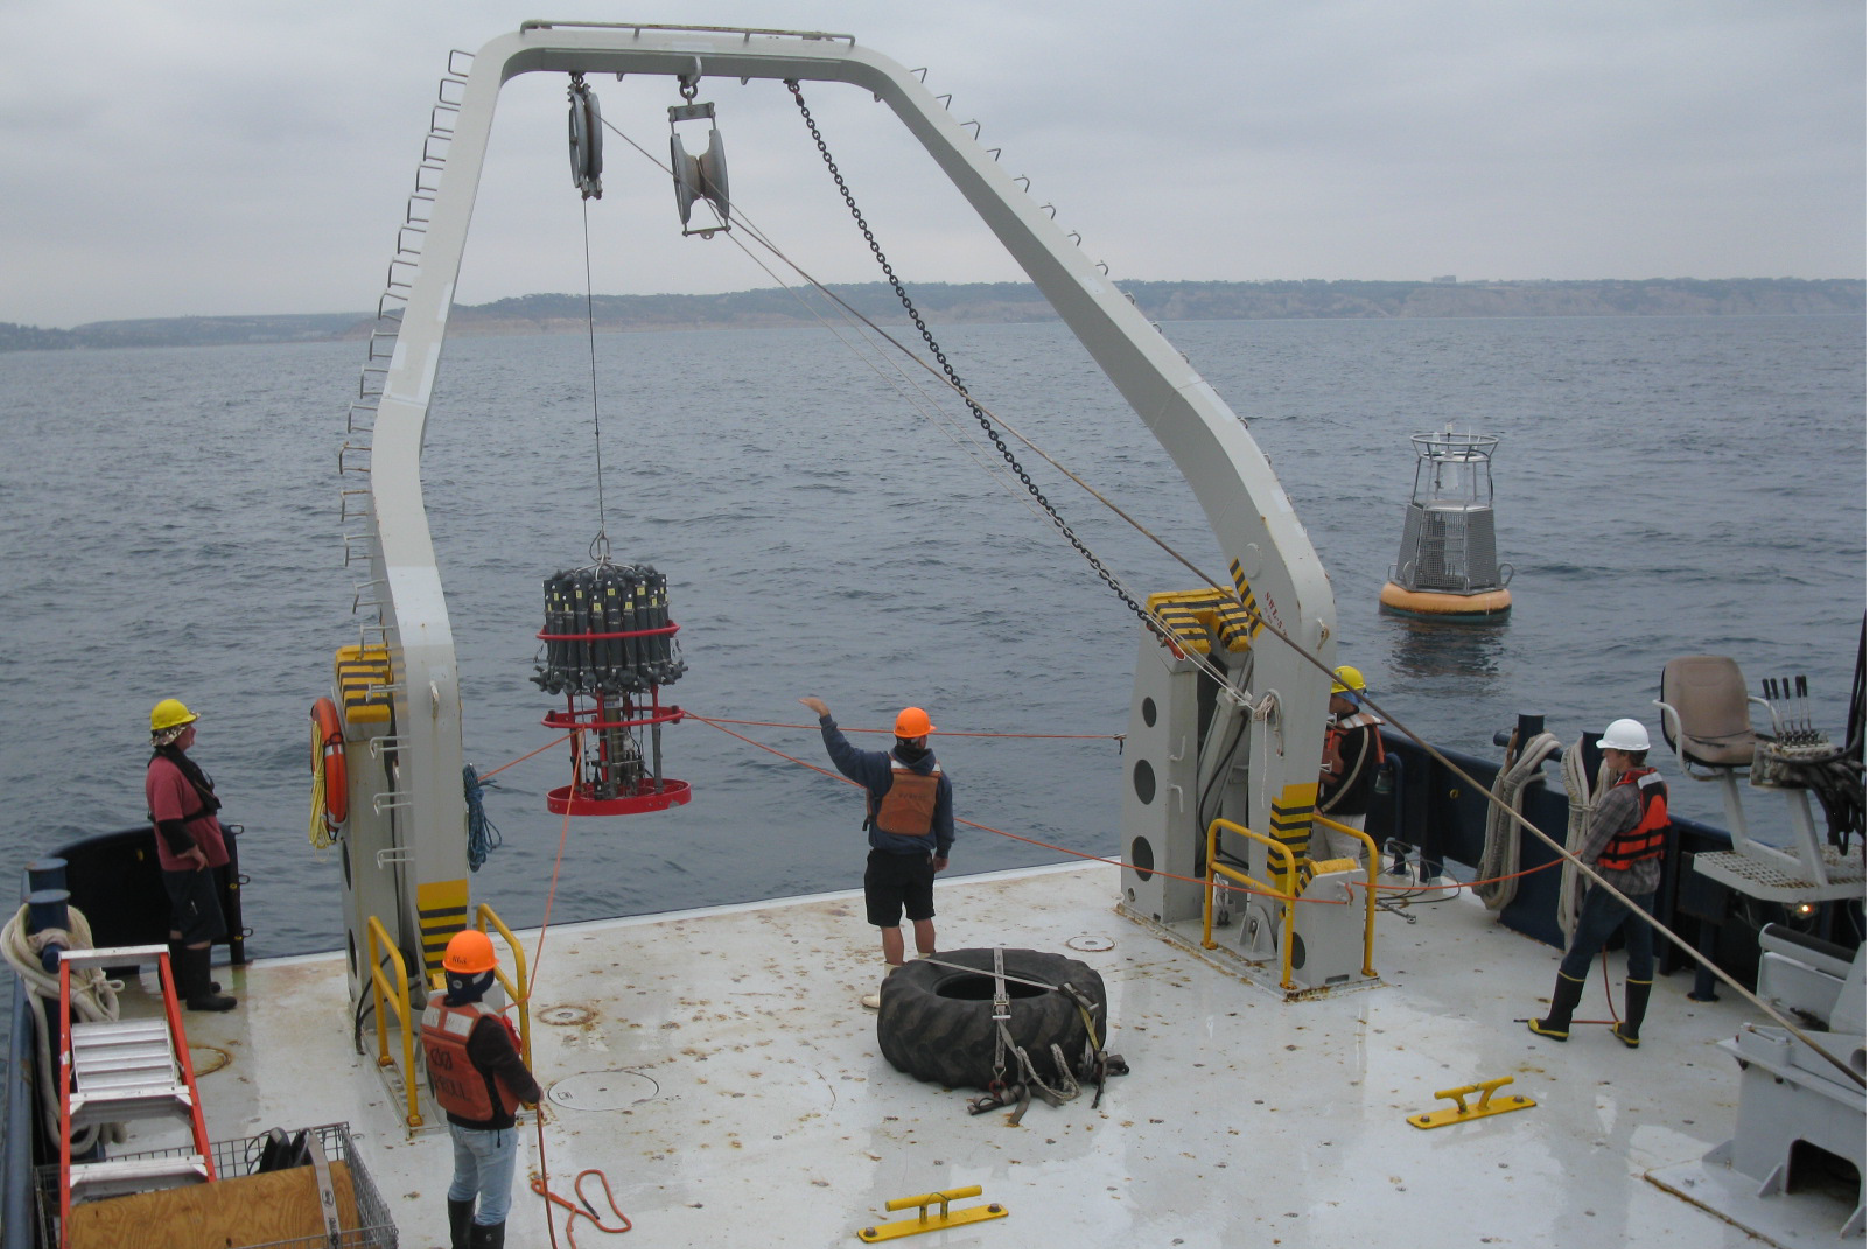 A CTD cast is performed next to the Del Mar mooring for sensor calibration and validation, 2011